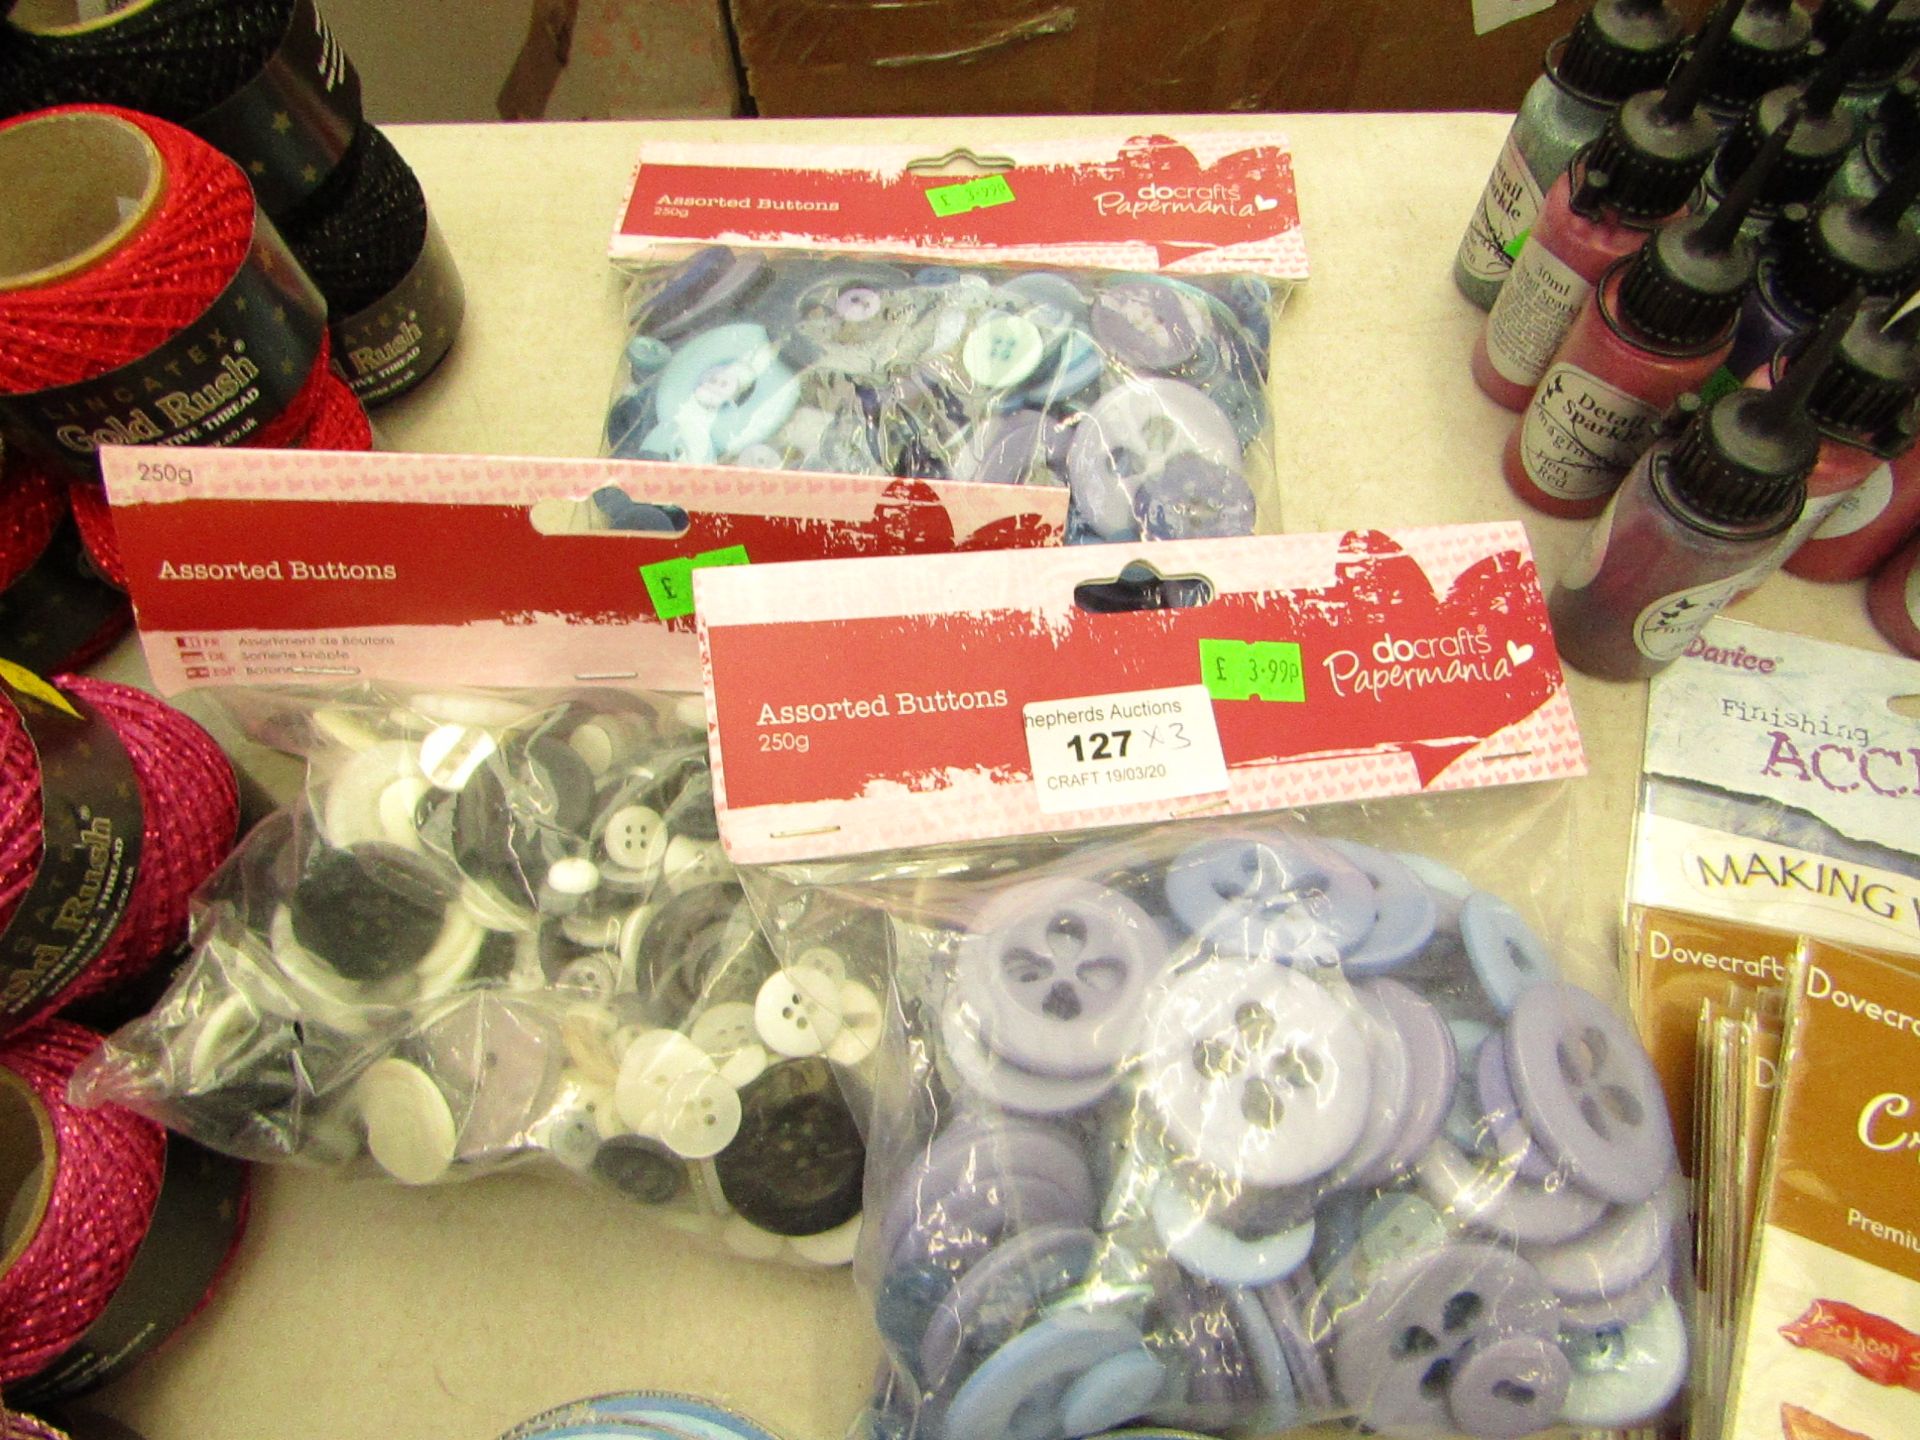 3 x Docrafts Papermania 250g Buttons new & packaged see iamge